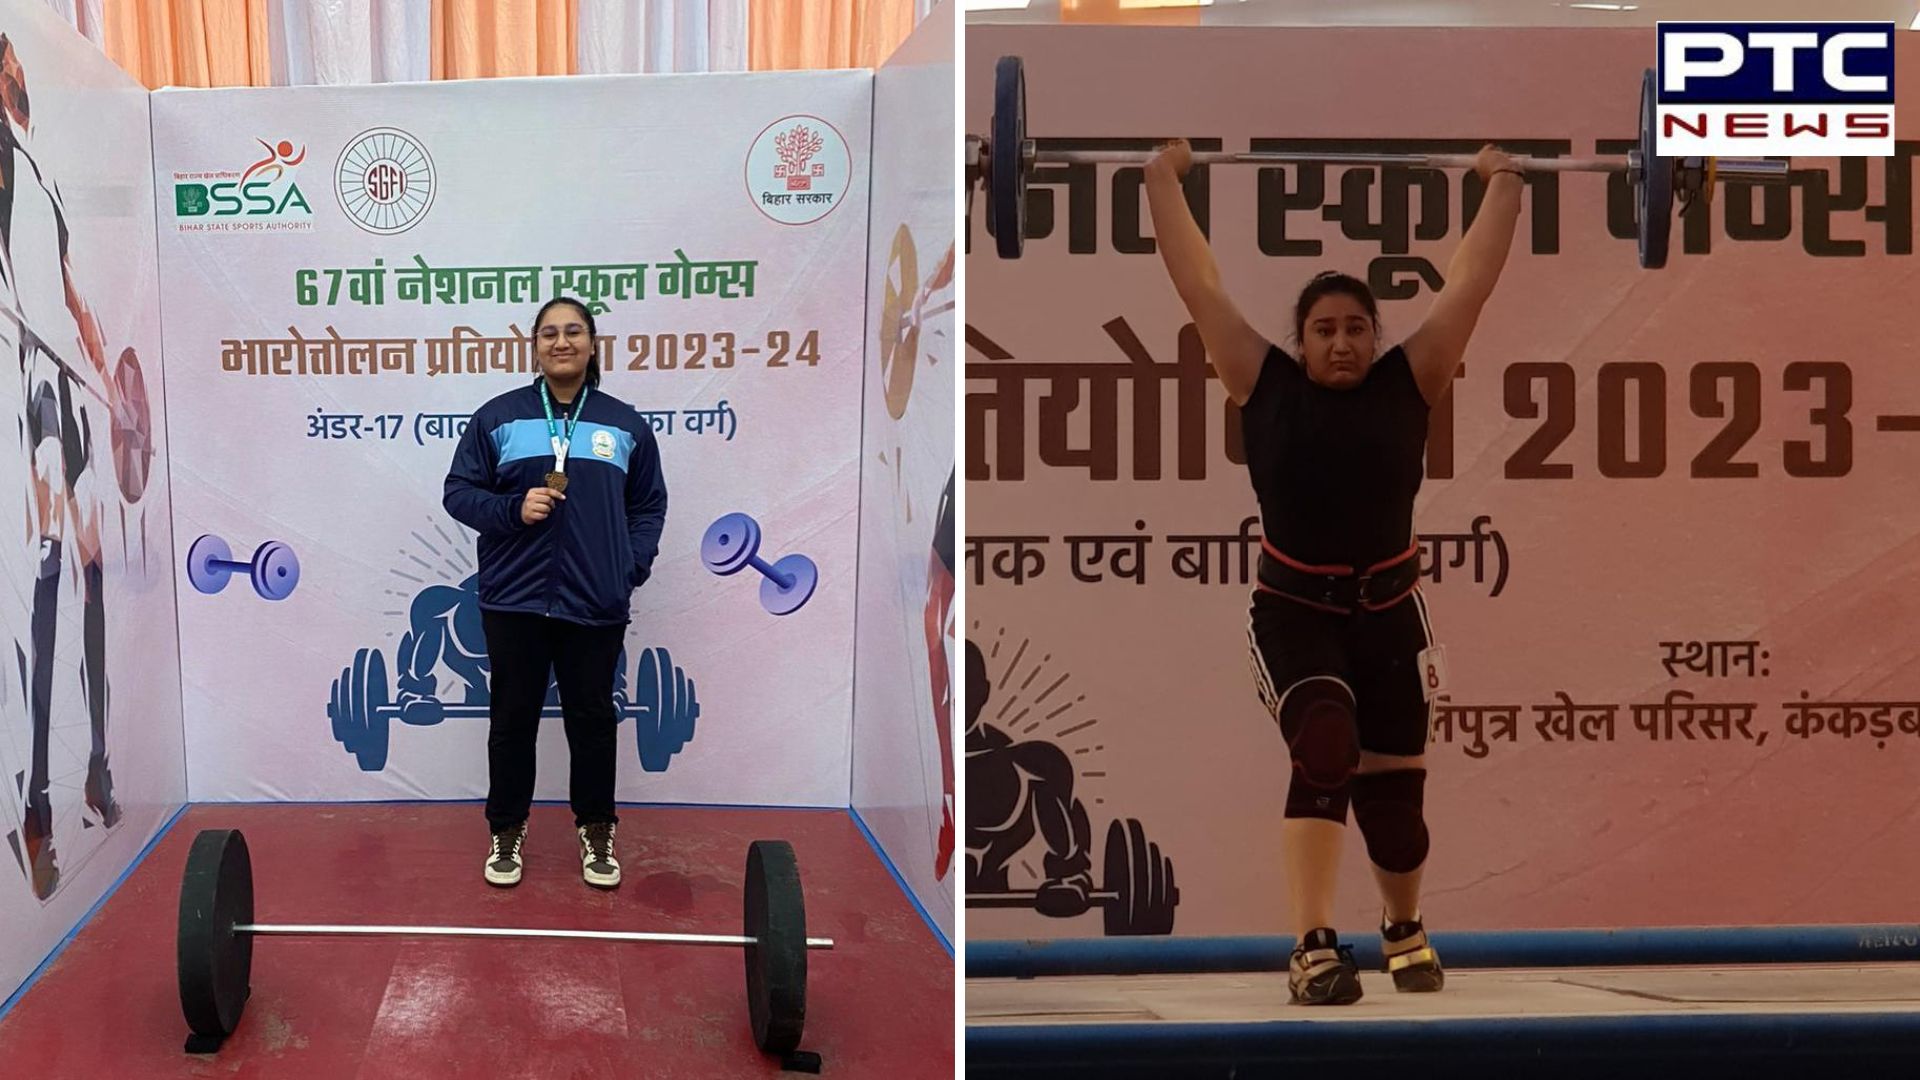 Punjab girl wins gold medal in 67th National School Games in Patna